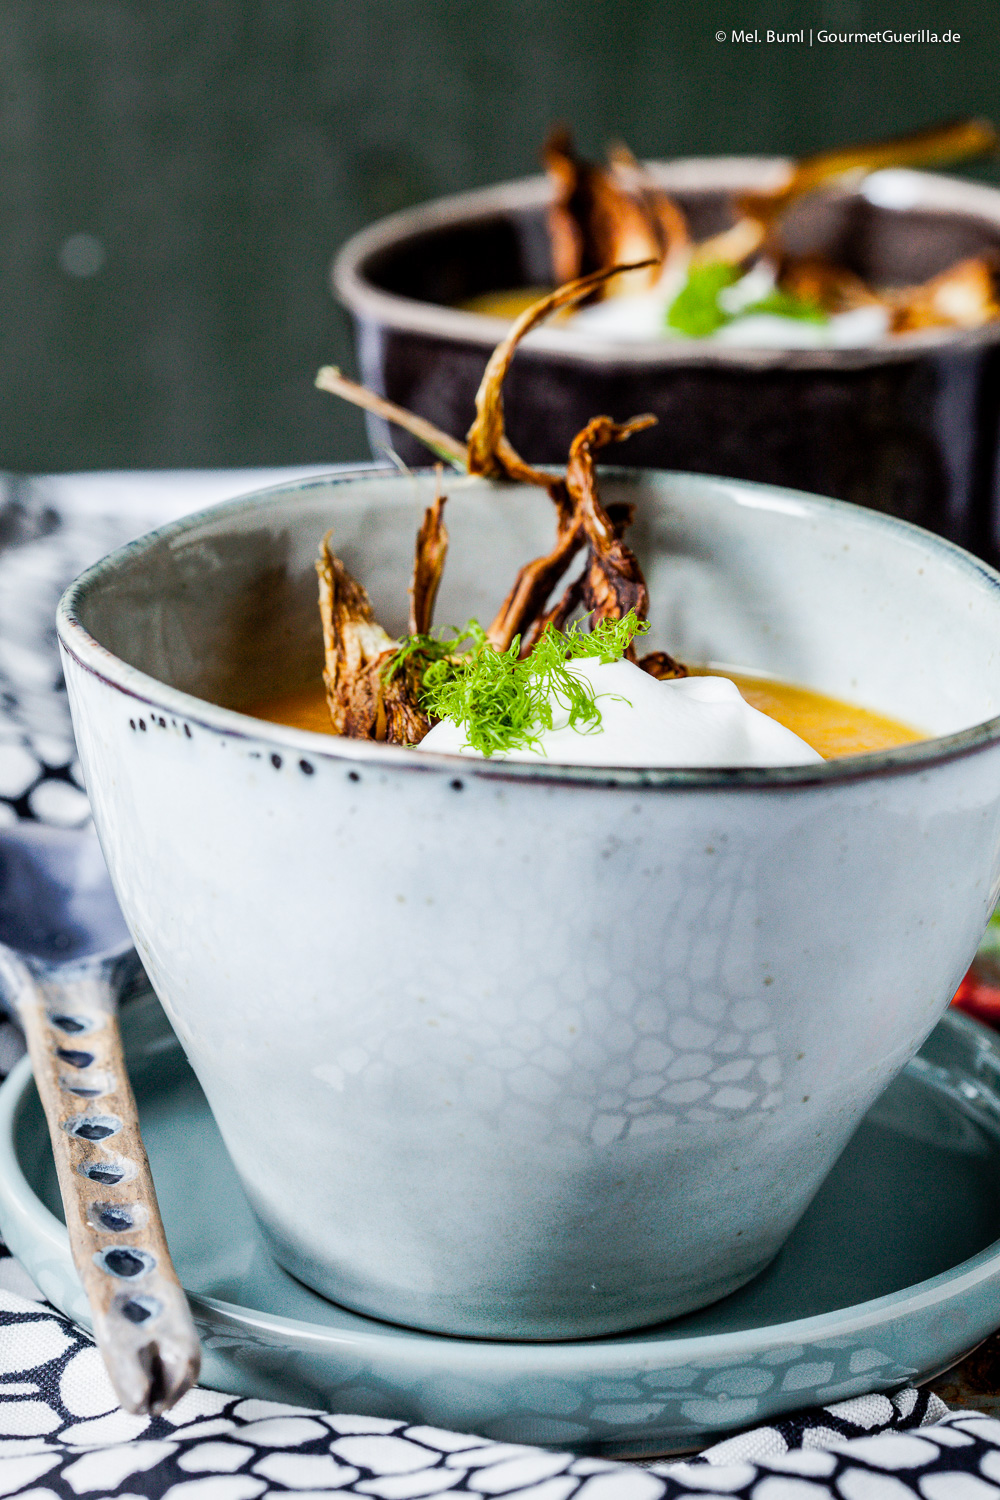 Melon and carrot soup with chili foam and crunchy fennel | GourmetGuerilla.com